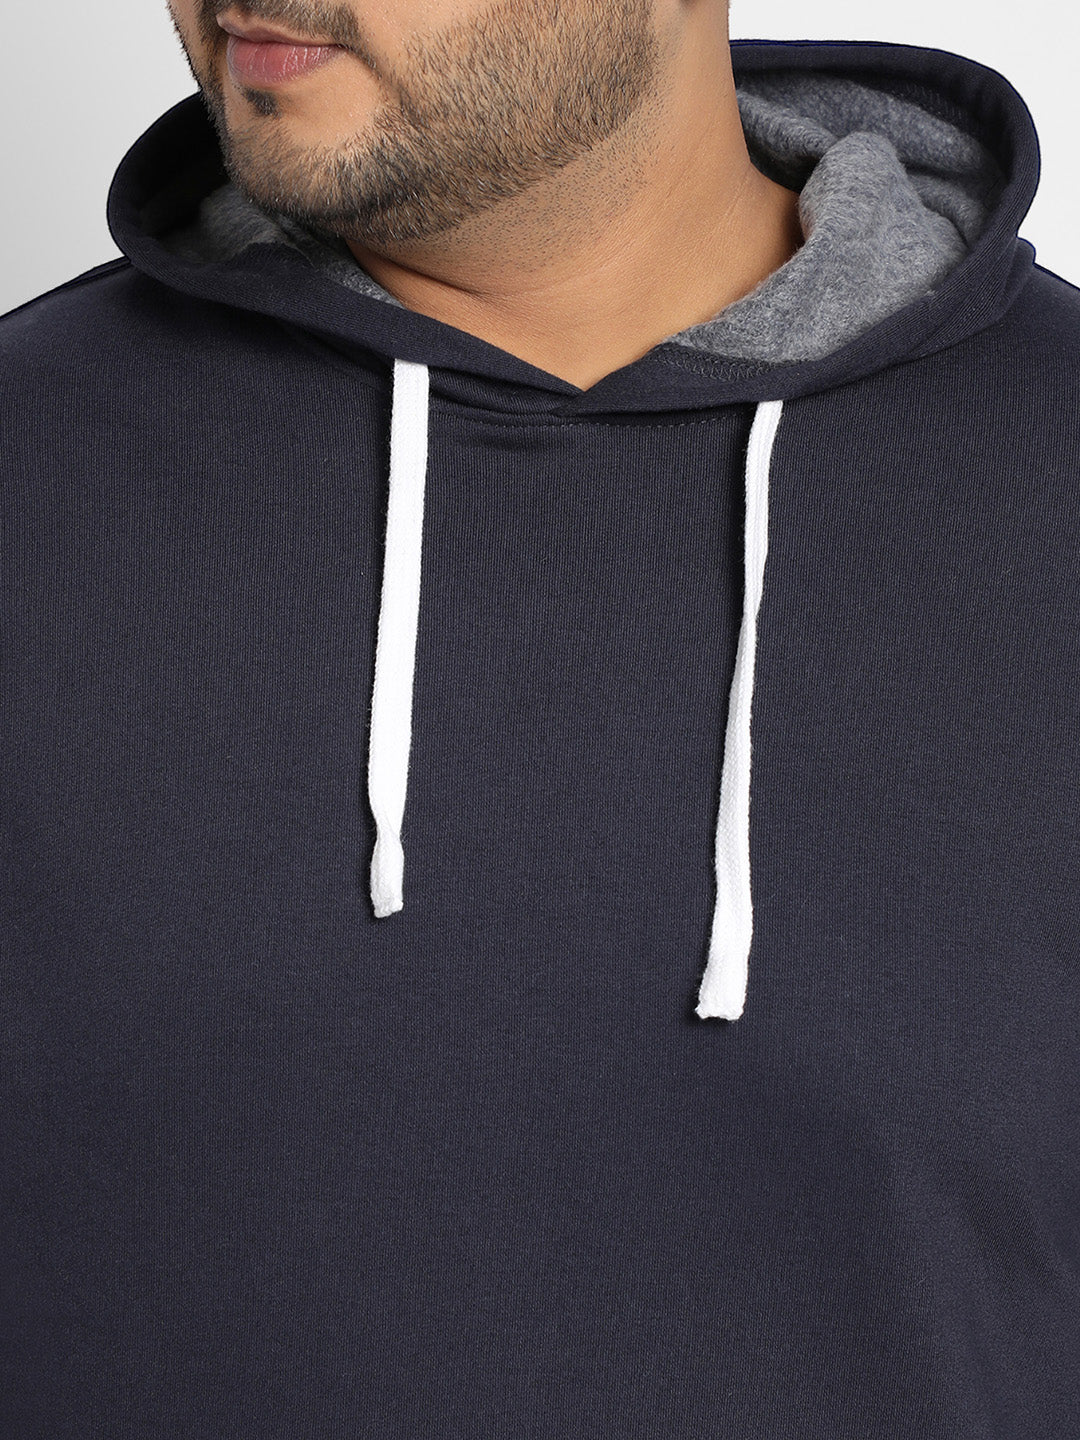 Plus Size Men's Navy Blue Pullover Hoodie With Contrast Drawstring